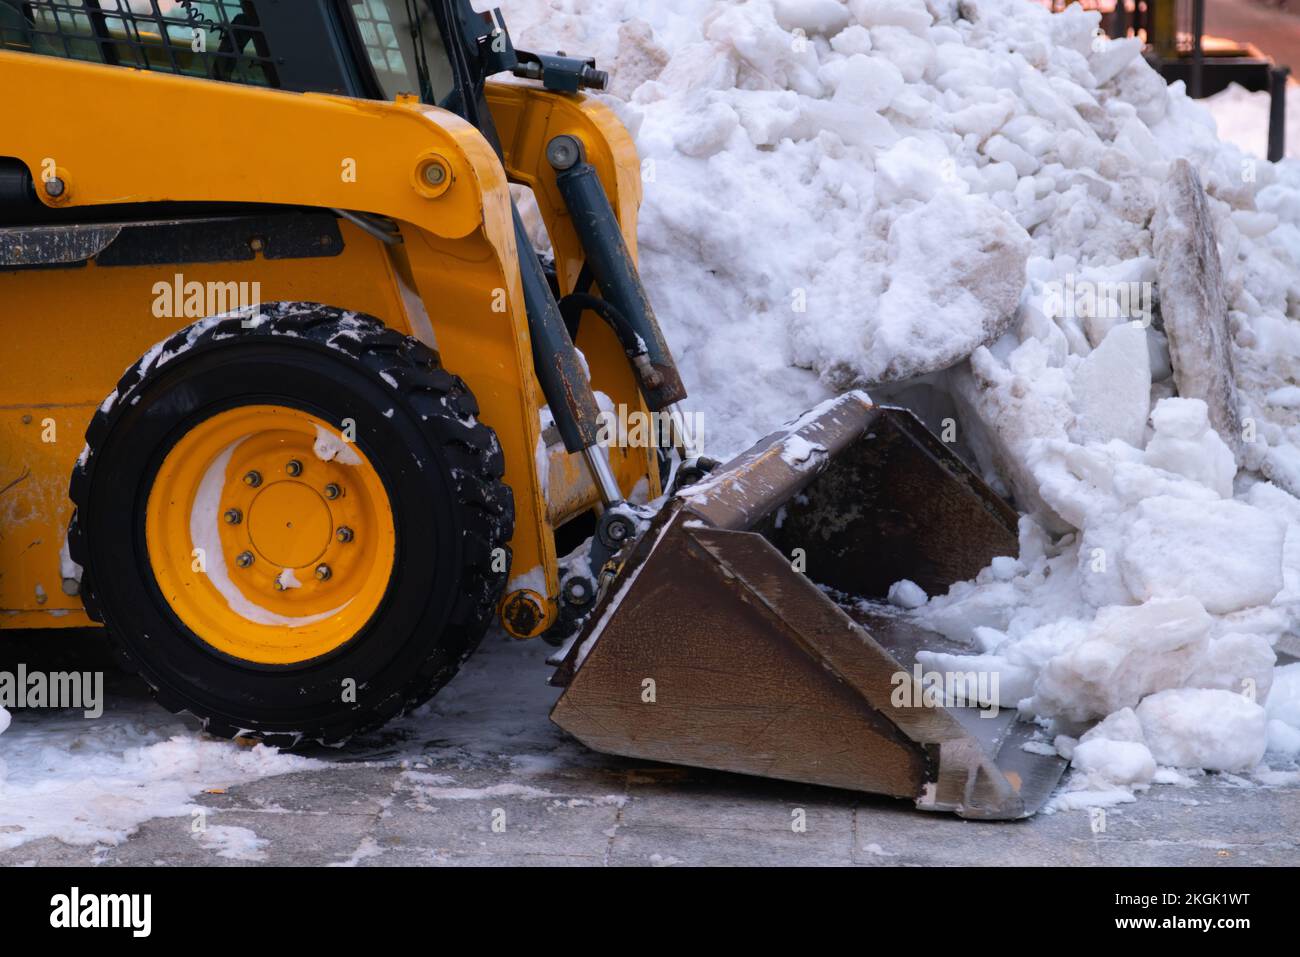 Heavy duty earth mover cleaning snow off the sidewalks after blizzard. Stock Photo